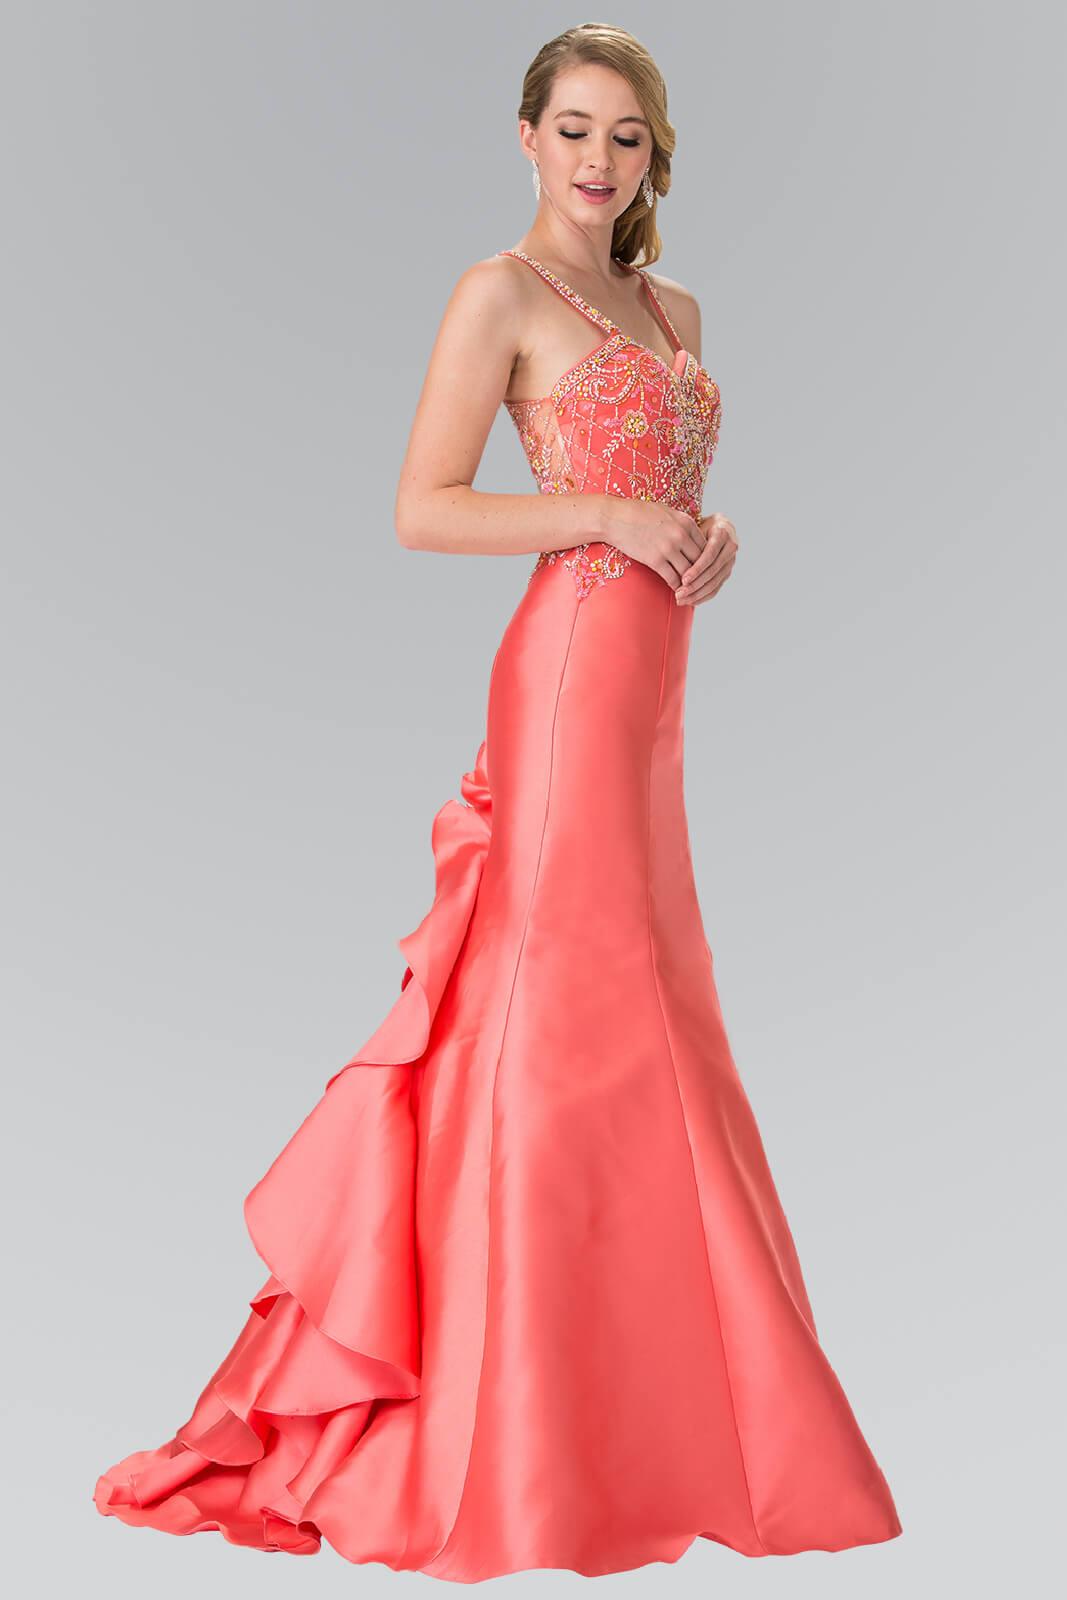 Long Prom Dress Homecoming Formal Gown - The Dress Outlet Elizabeth K